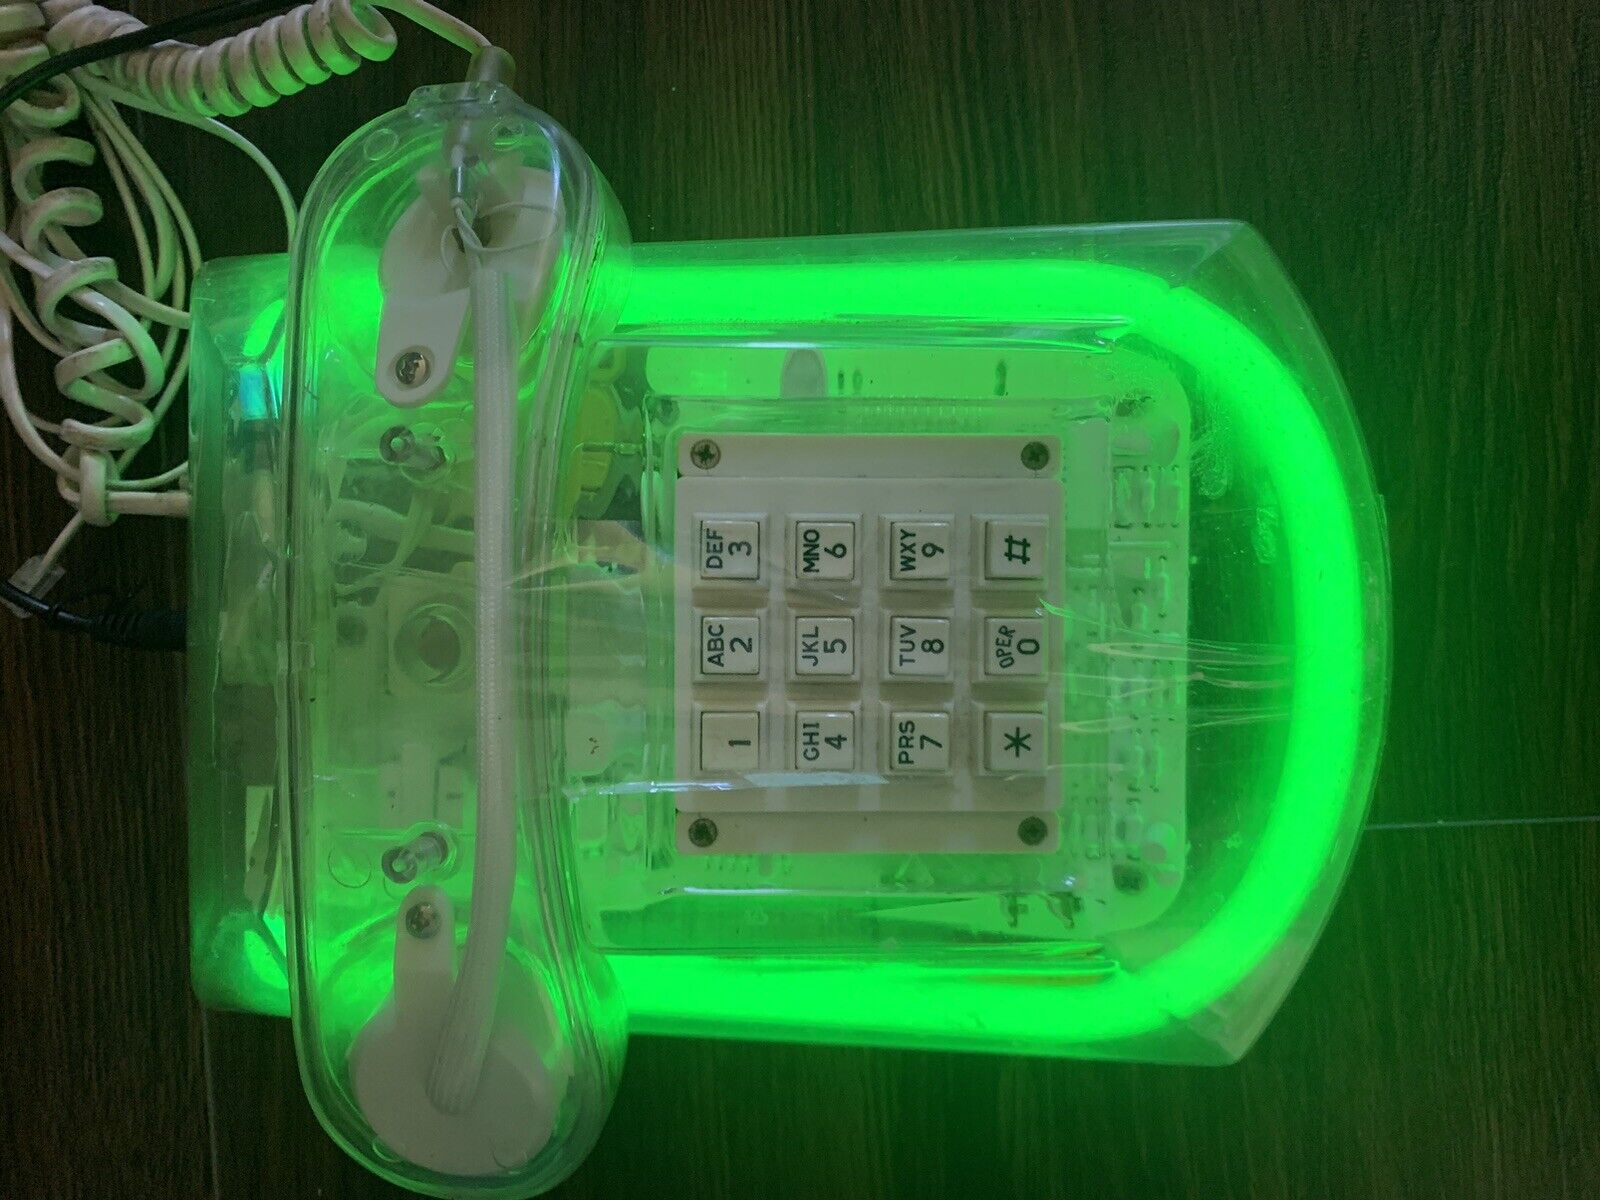 VTG 1980's ROXANNE 9221-8 Clear Lucite Light Up NEON Green Push Button Phone